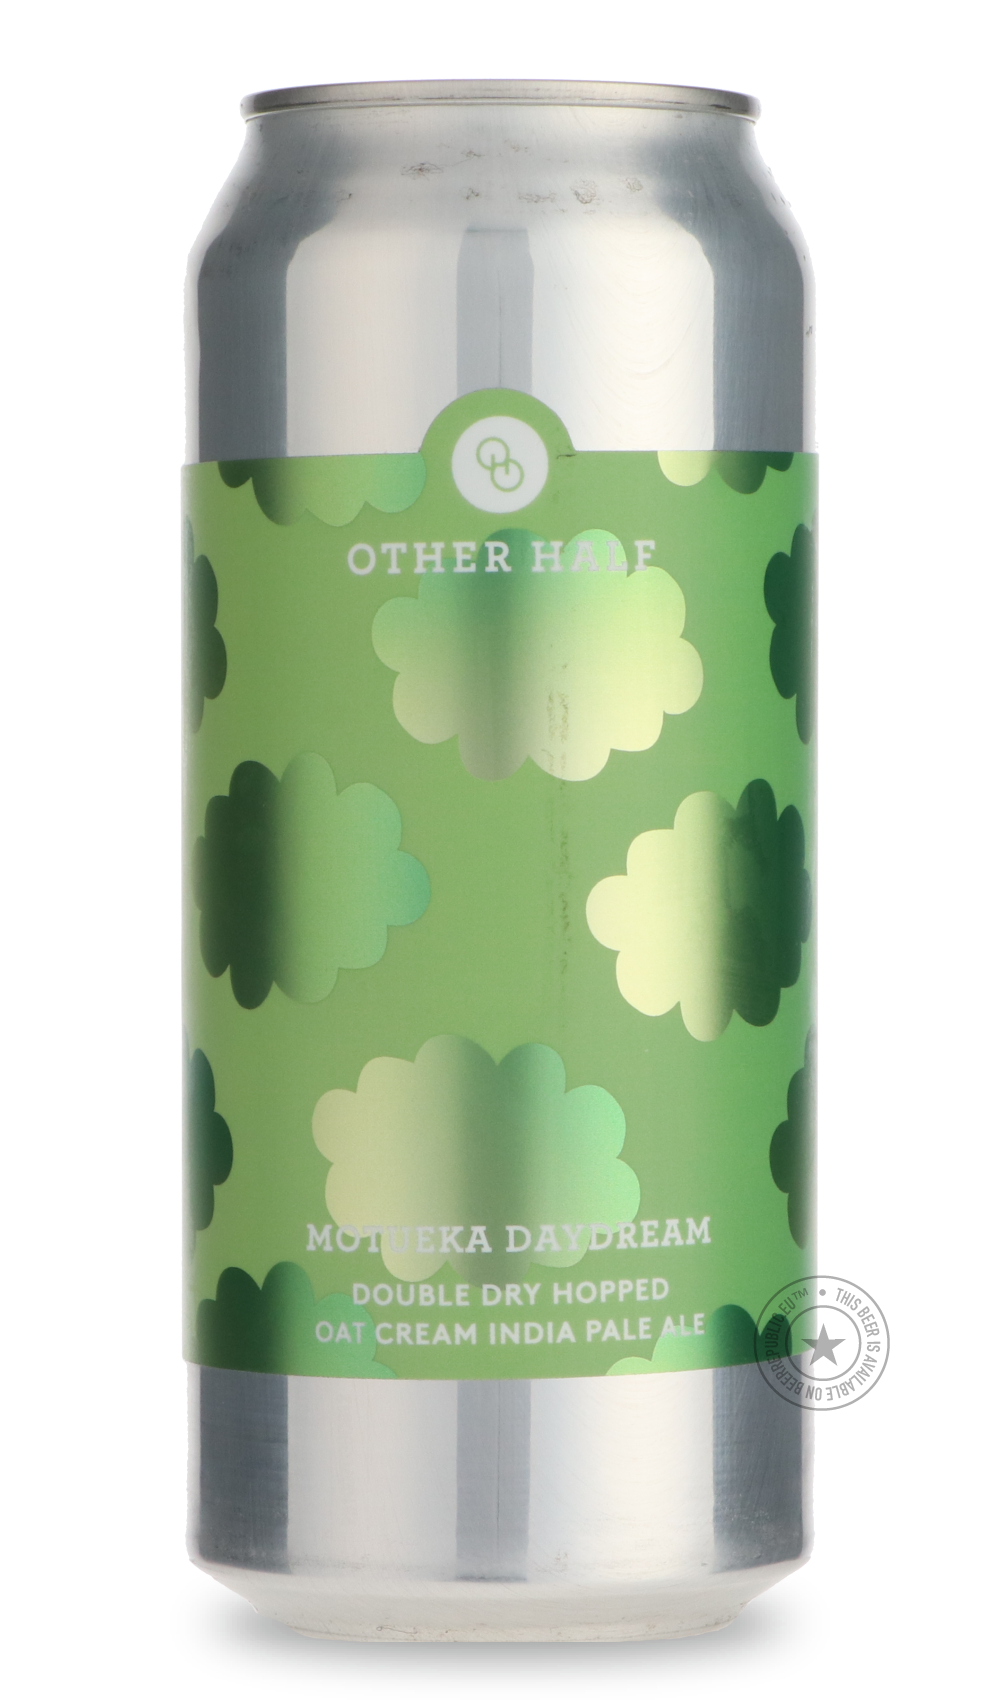 -Other Half- Motueka Daydream-IPA- Only @ Beer Republic - The best online beer store for American & Canadian craft beer - Buy beer online from the USA and Canada - Bier online kopen - Amerikaans bier kopen - Craft beer store - Craft beer kopen - Amerikanisch bier kaufen - Bier online kaufen - Acheter biere online - IPA - Stout - Porter - New England IPA - Hazy IPA - Imperial Stout - Barrel Aged - Barrel Aged Imperial Stout - Brown - Dark beer - Blond - Blonde - Pilsner - Lager - Wheat - Weizen - Amber - Bar